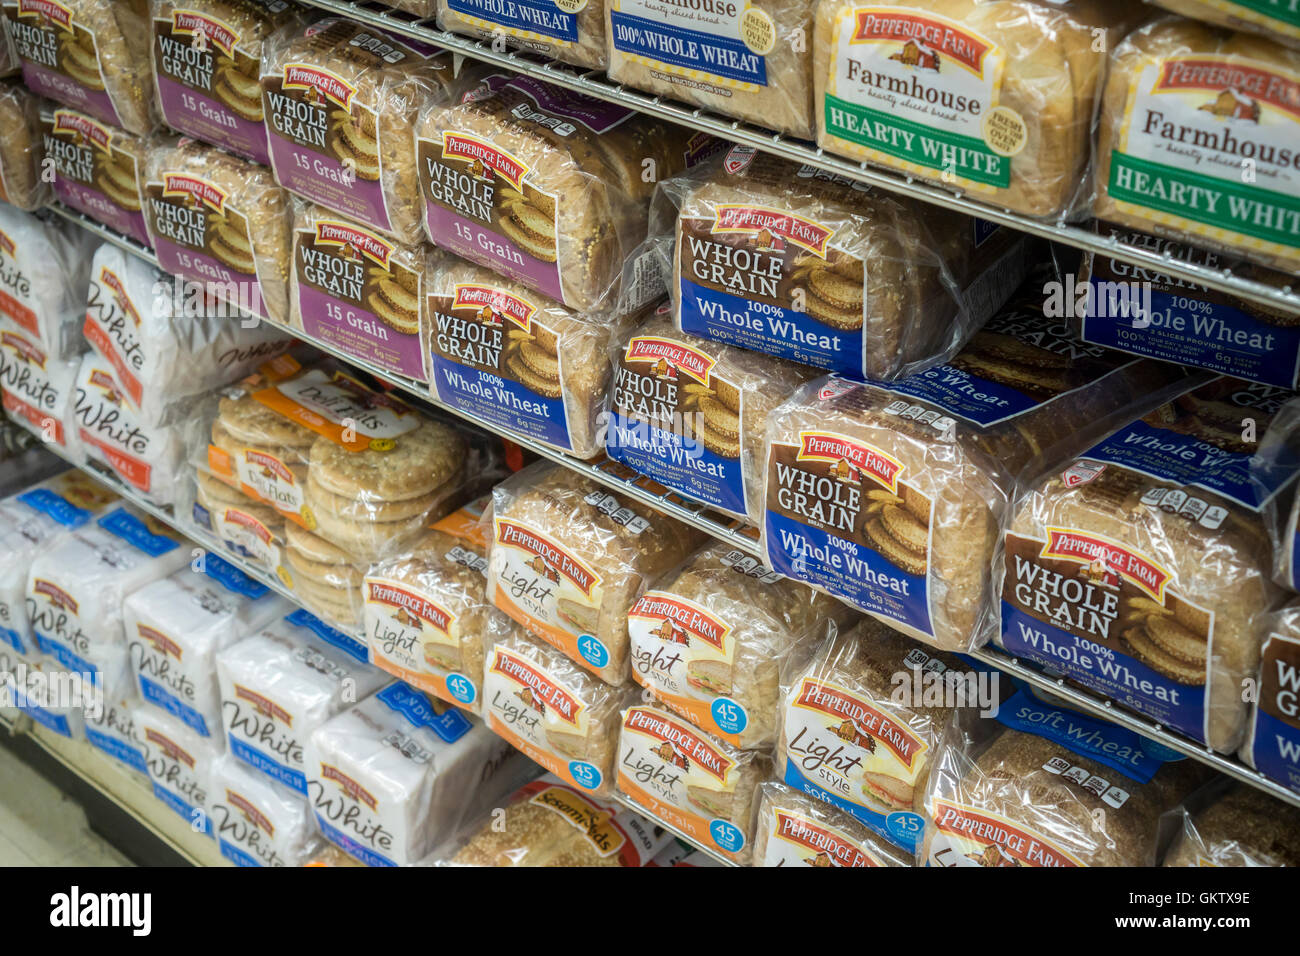 Loaves of different varieties of Pepperidge Farm breads are seen on a supermarket shelf in New York on Saturday, August 13, 2016. (© Richard B. Levine) Stock Photo